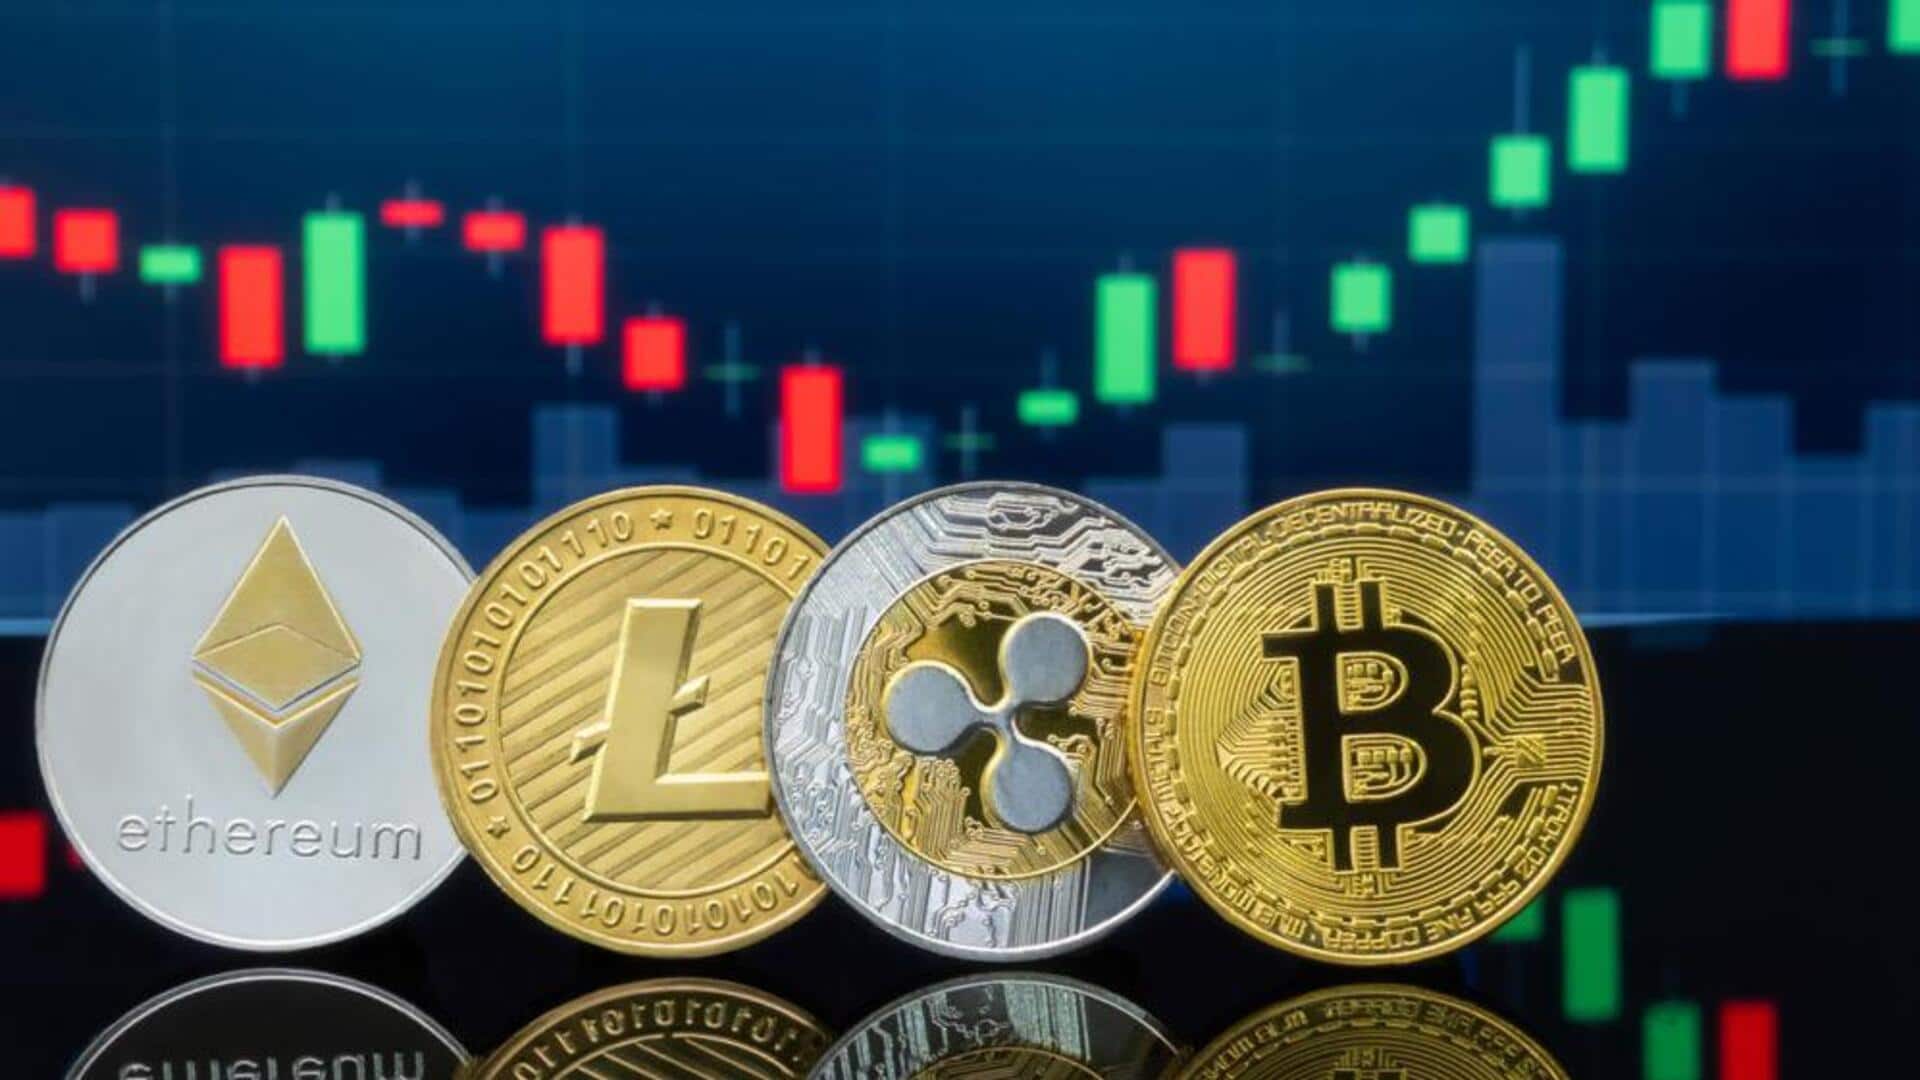 Cryptocurrency prices: Check today's rates of Bitcoin, Ethereum, Tether, Solana